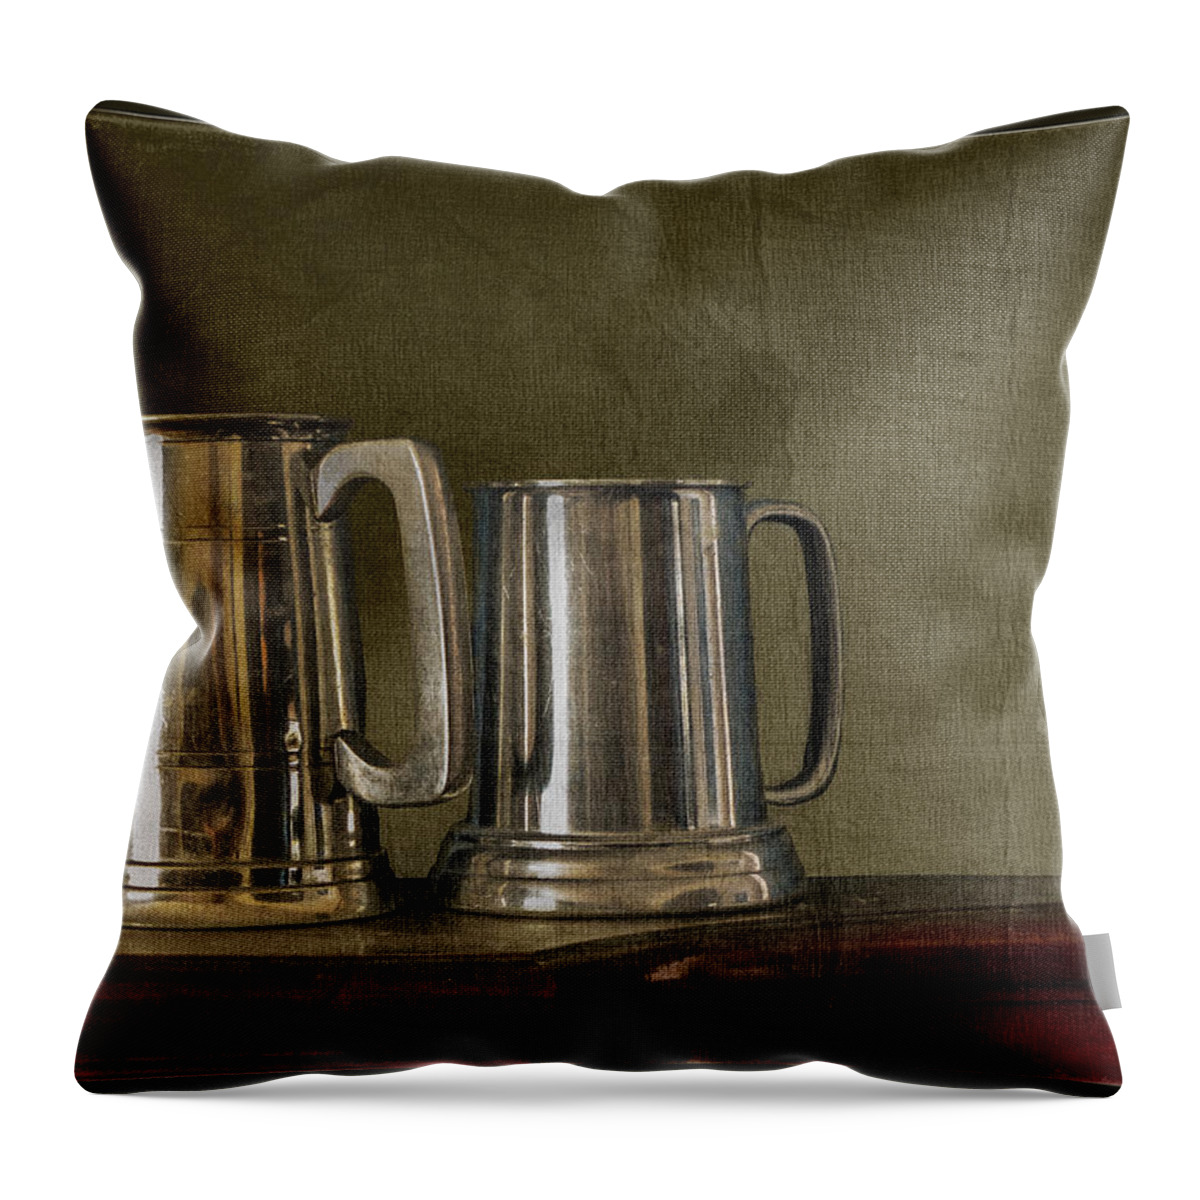 Still Life Throw Pillow featuring the photograph Pewter Tones by John Anderson